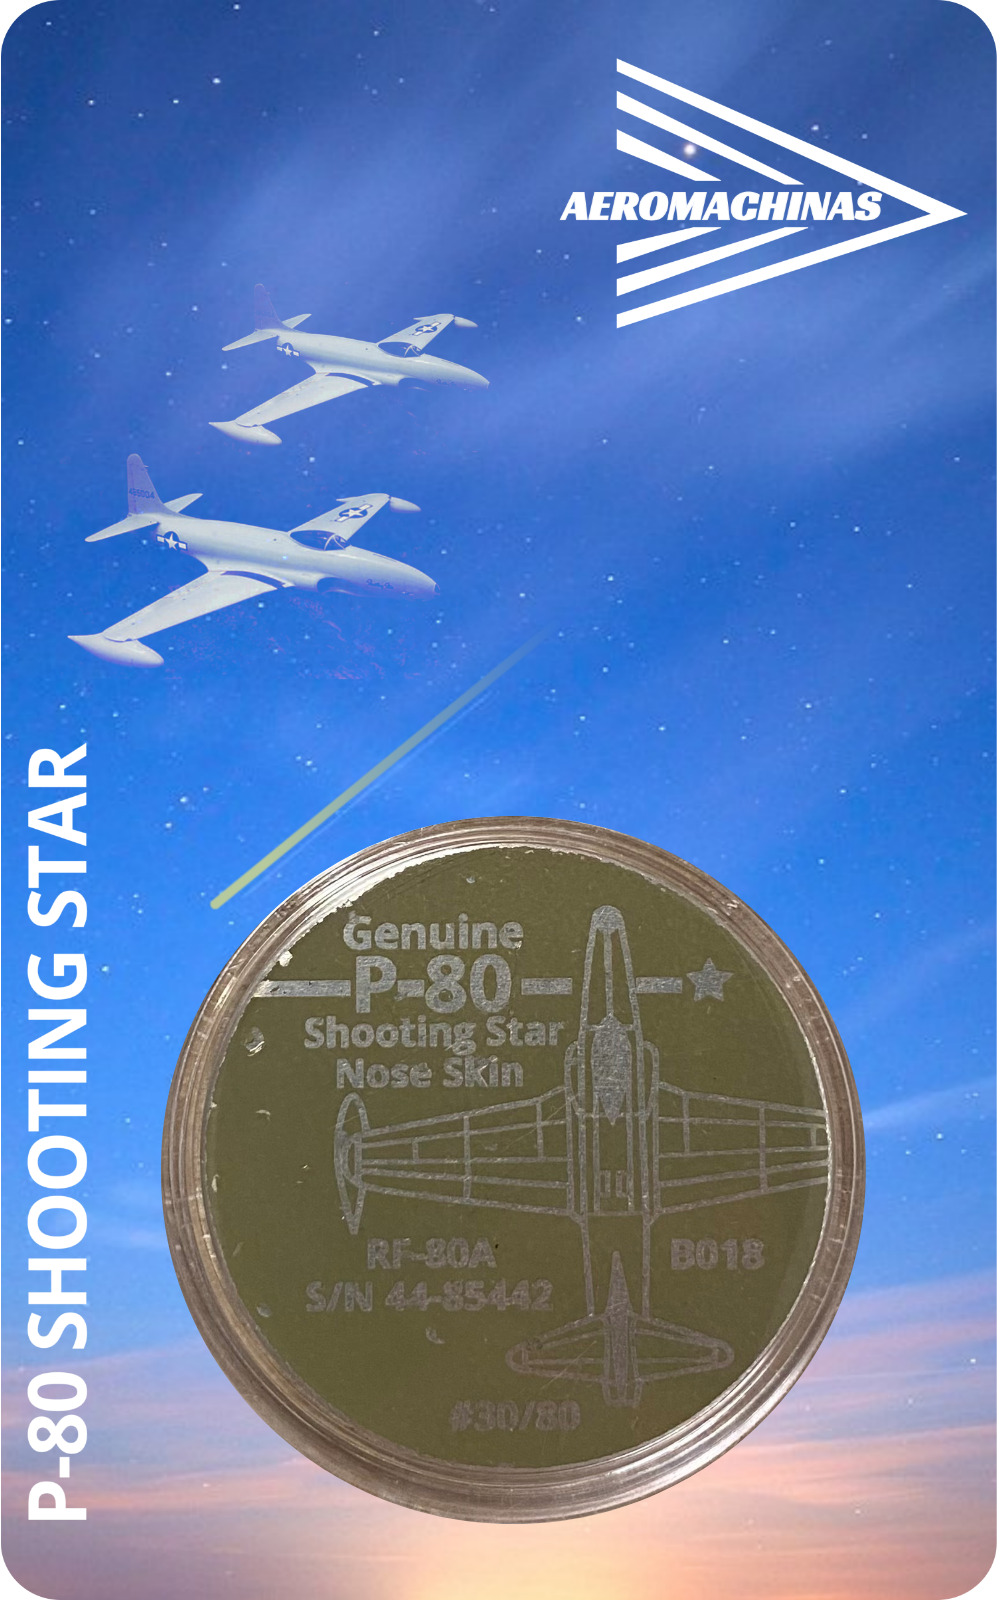 P-80 Shooting Star Fighter Jet Skin Challenge Coin S/N 44-85442